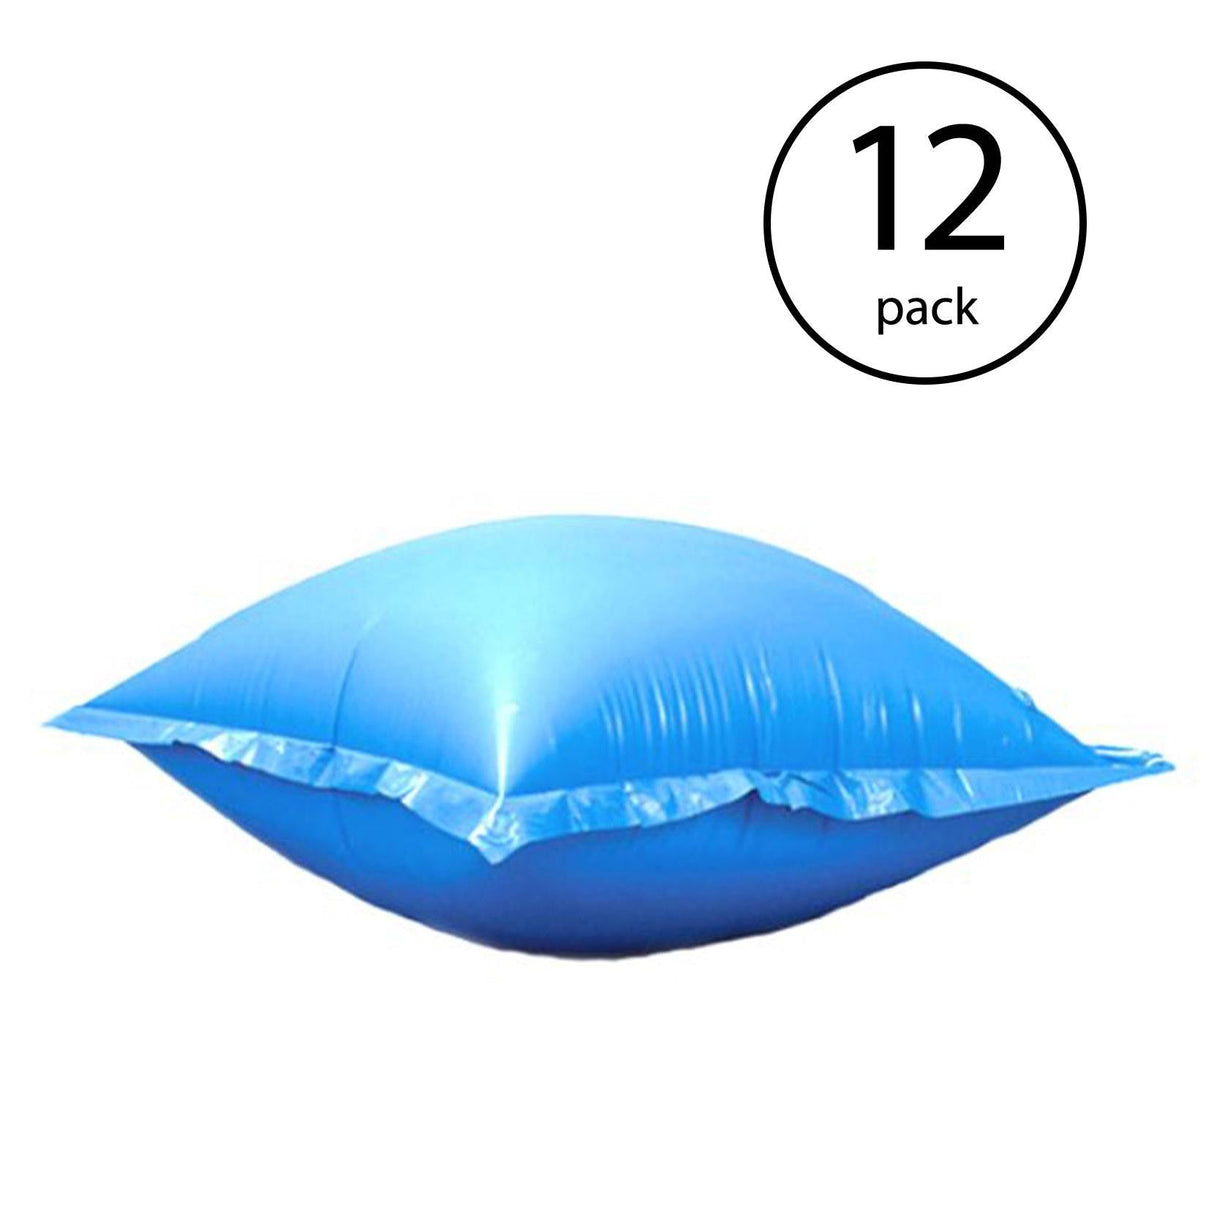 Swimline 4x4 Feet Winter Closing Above Ground Pool Air Pillow Cover (12 Pack)